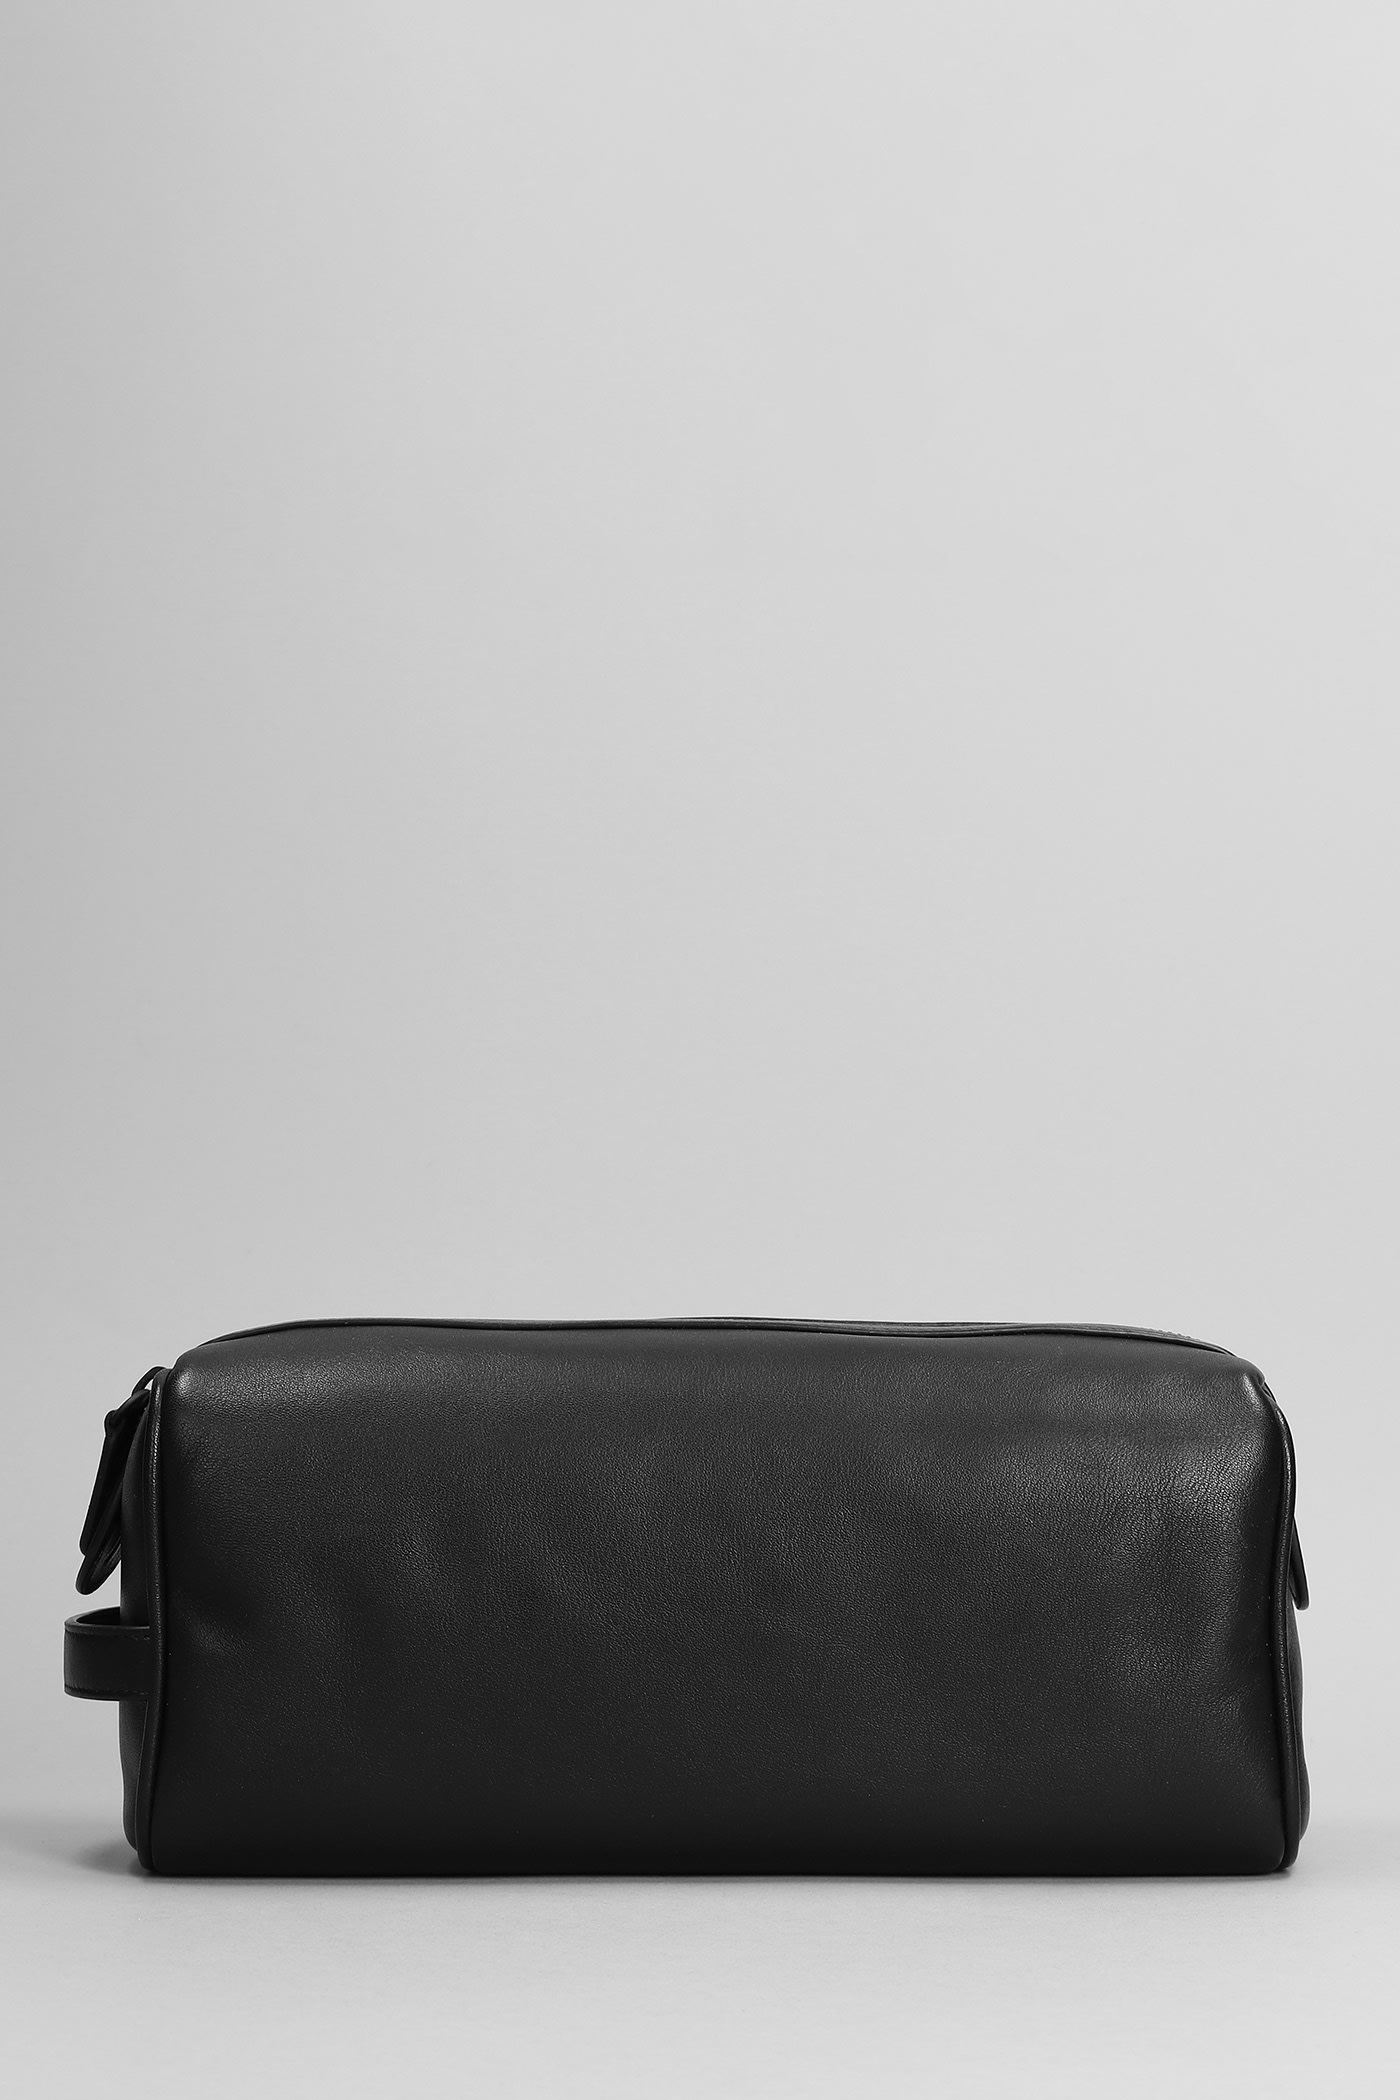 Common Projects Hand Bag In Black Leather